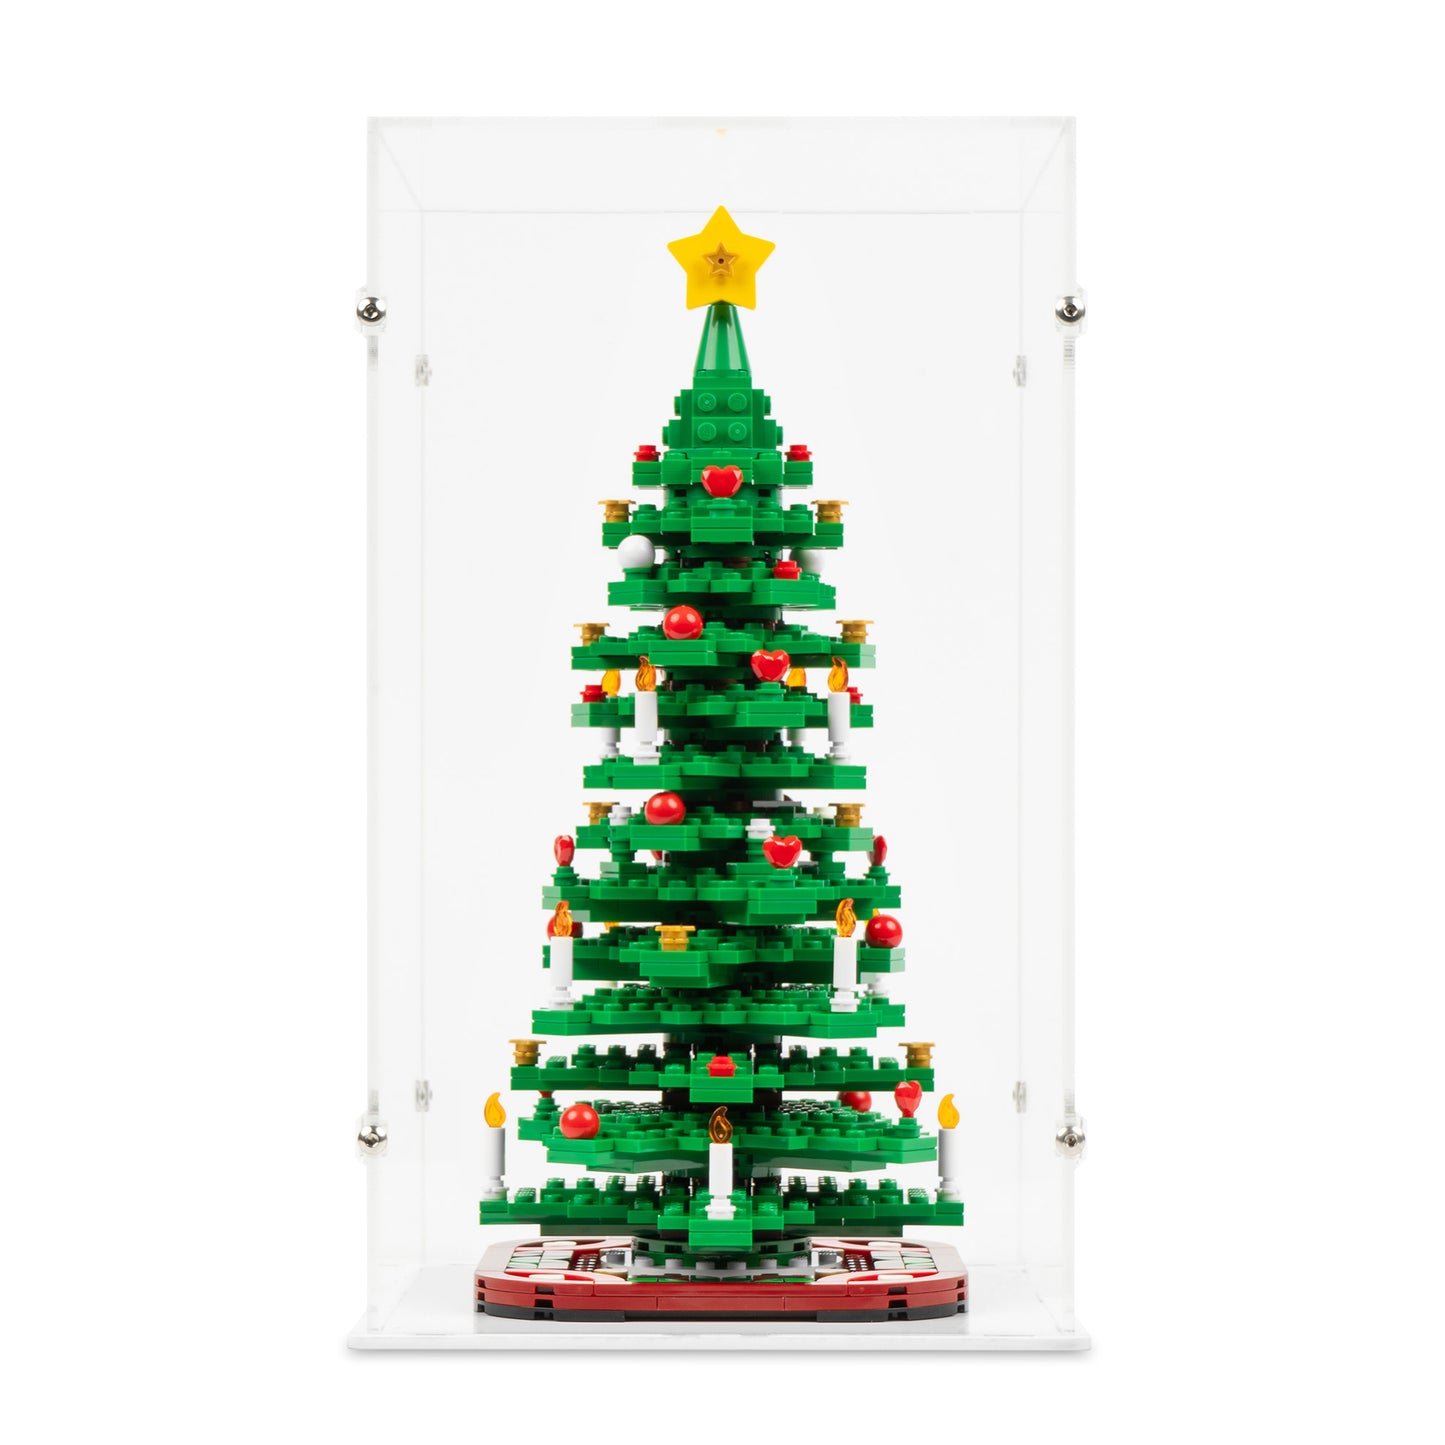 Front view of LEGO 40573 Christmas Tree Display Case with a white base.